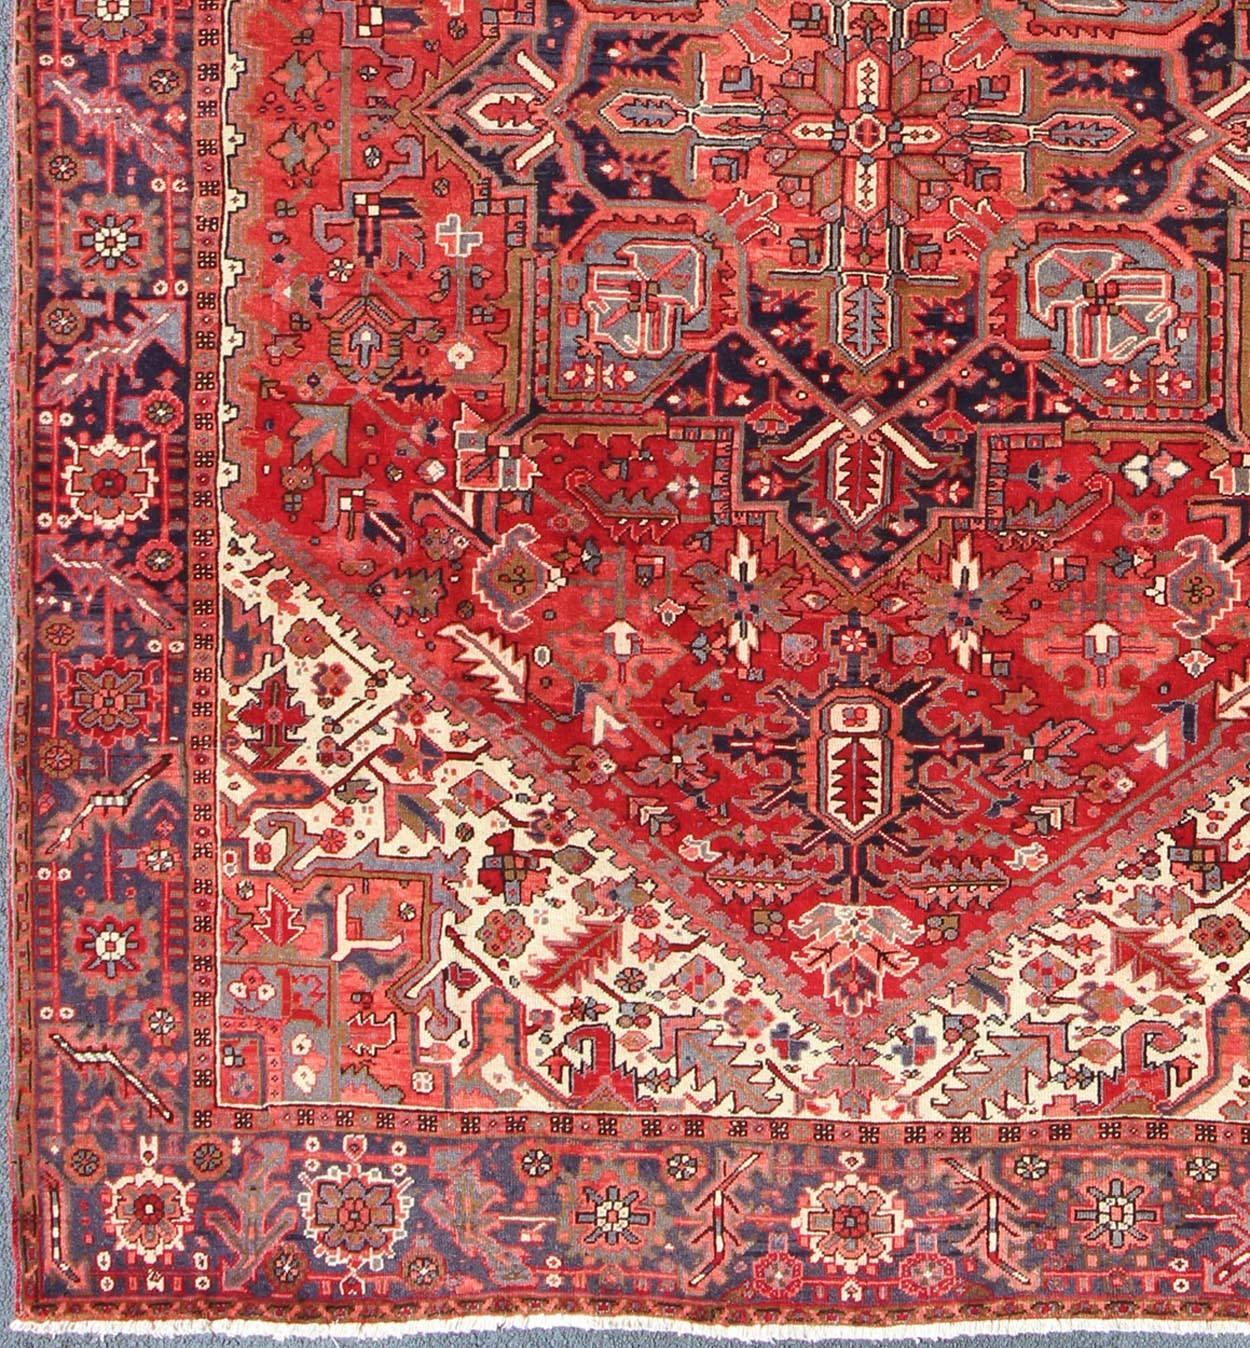 Burgundy midcentury Persian Heriz rug with stylized medallion design, rug h-610-11, country of origin / type: Iran / Heriz, circa 1950

This magnificent antique Persian Heriz carpet from the mid-20th century (circa 1950) bears an exquisite design